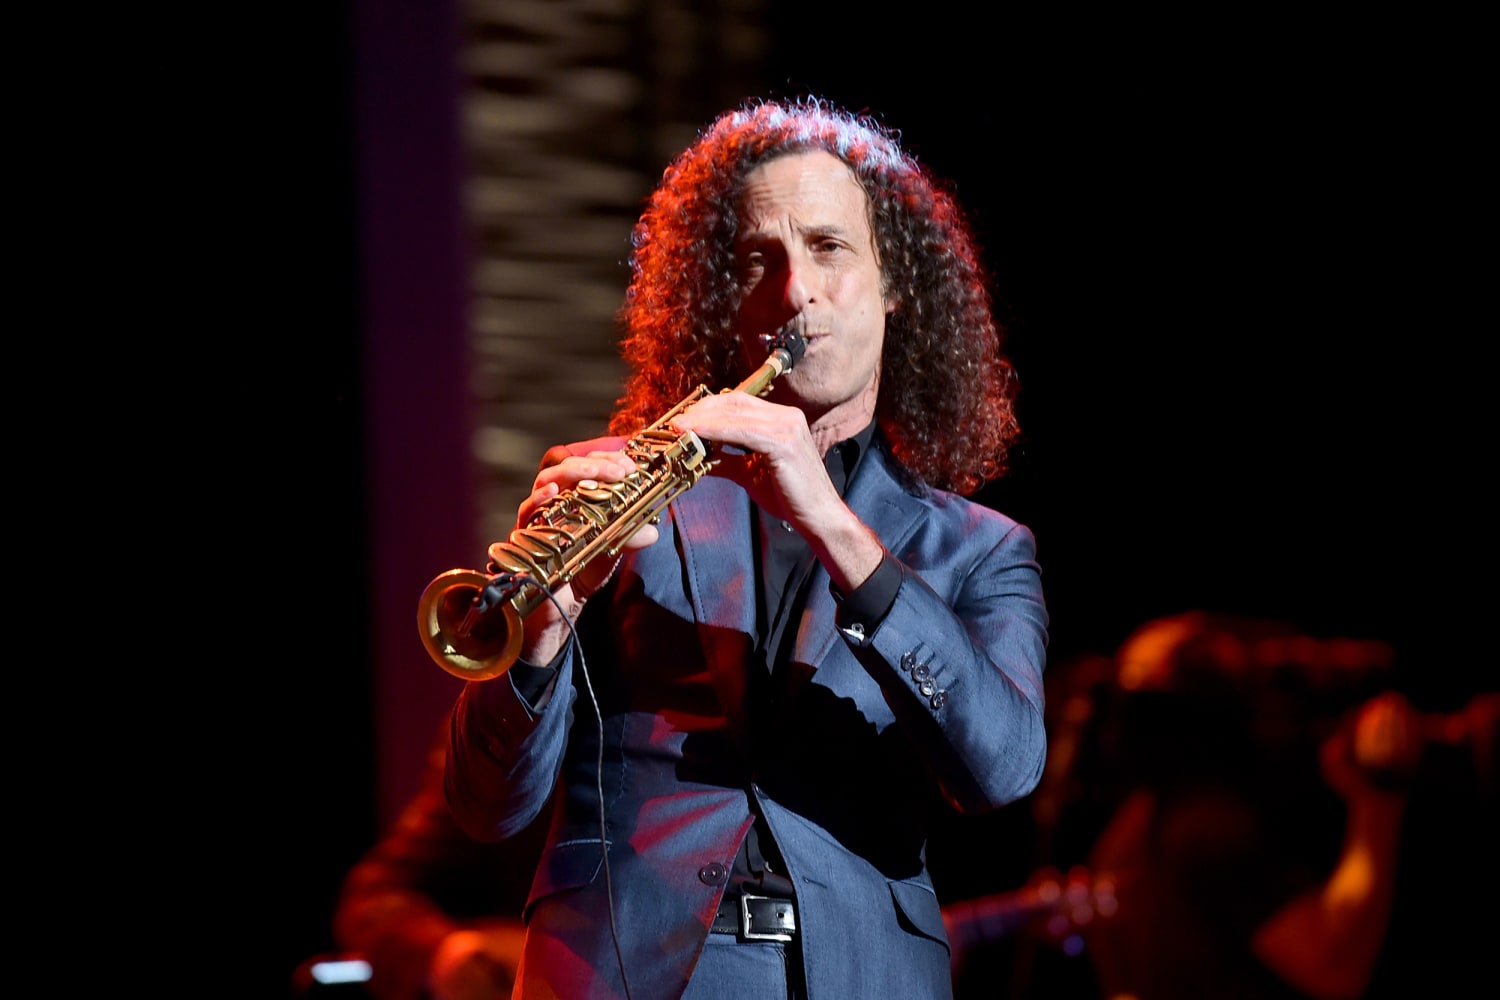 The unfair snobbery at the center of decades of Kenny G hate